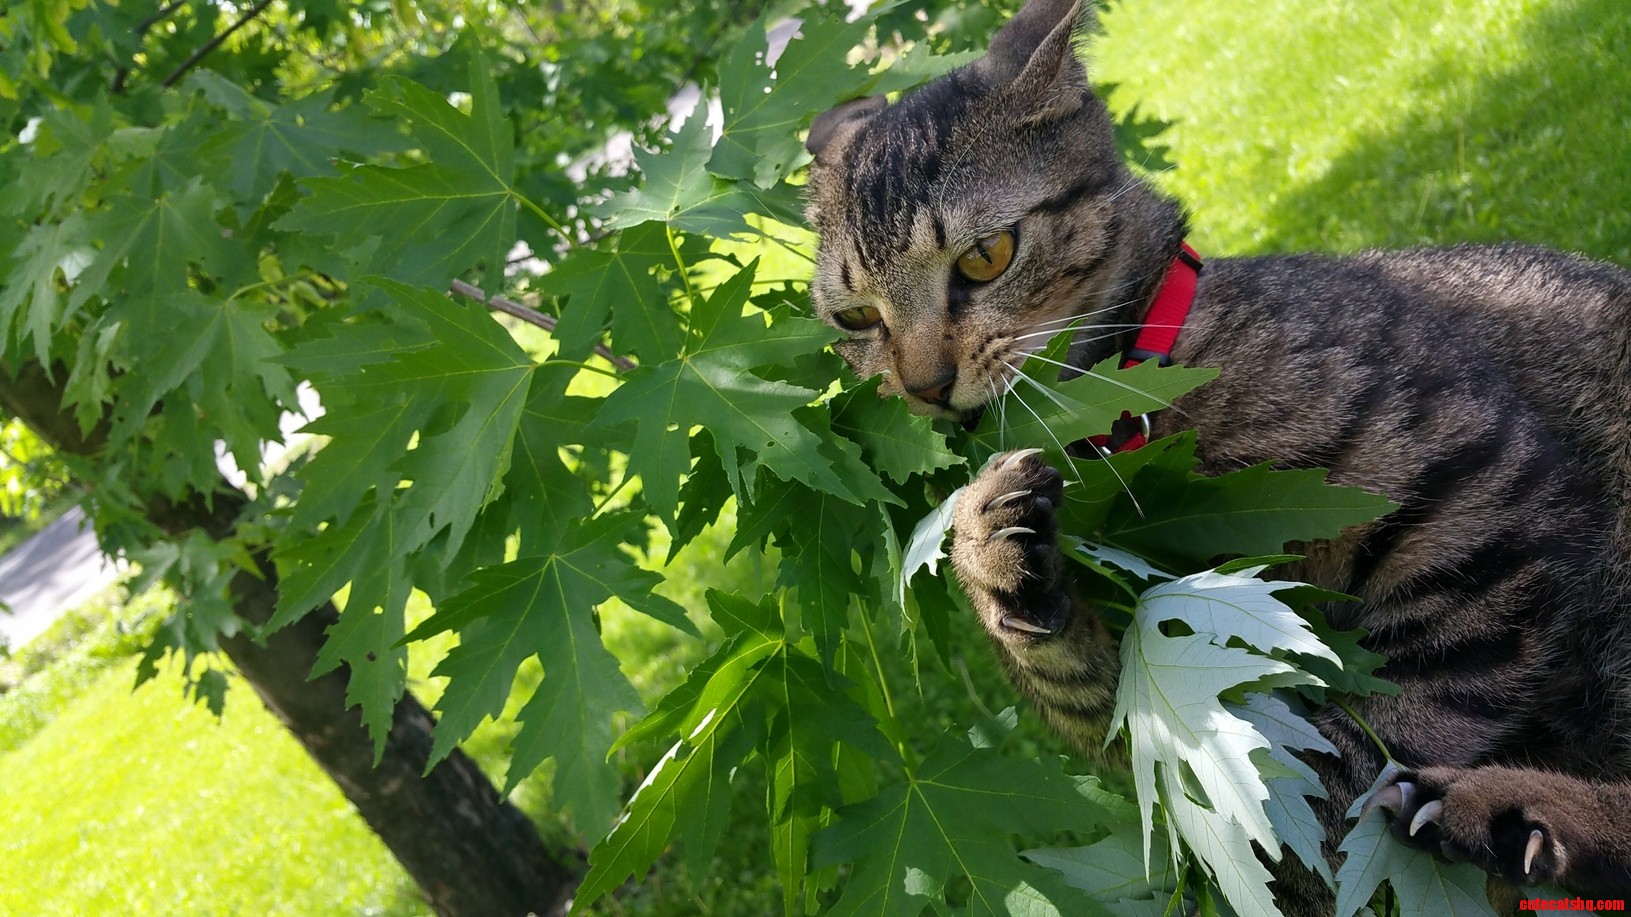 Cosmo enjoying the great outdoors